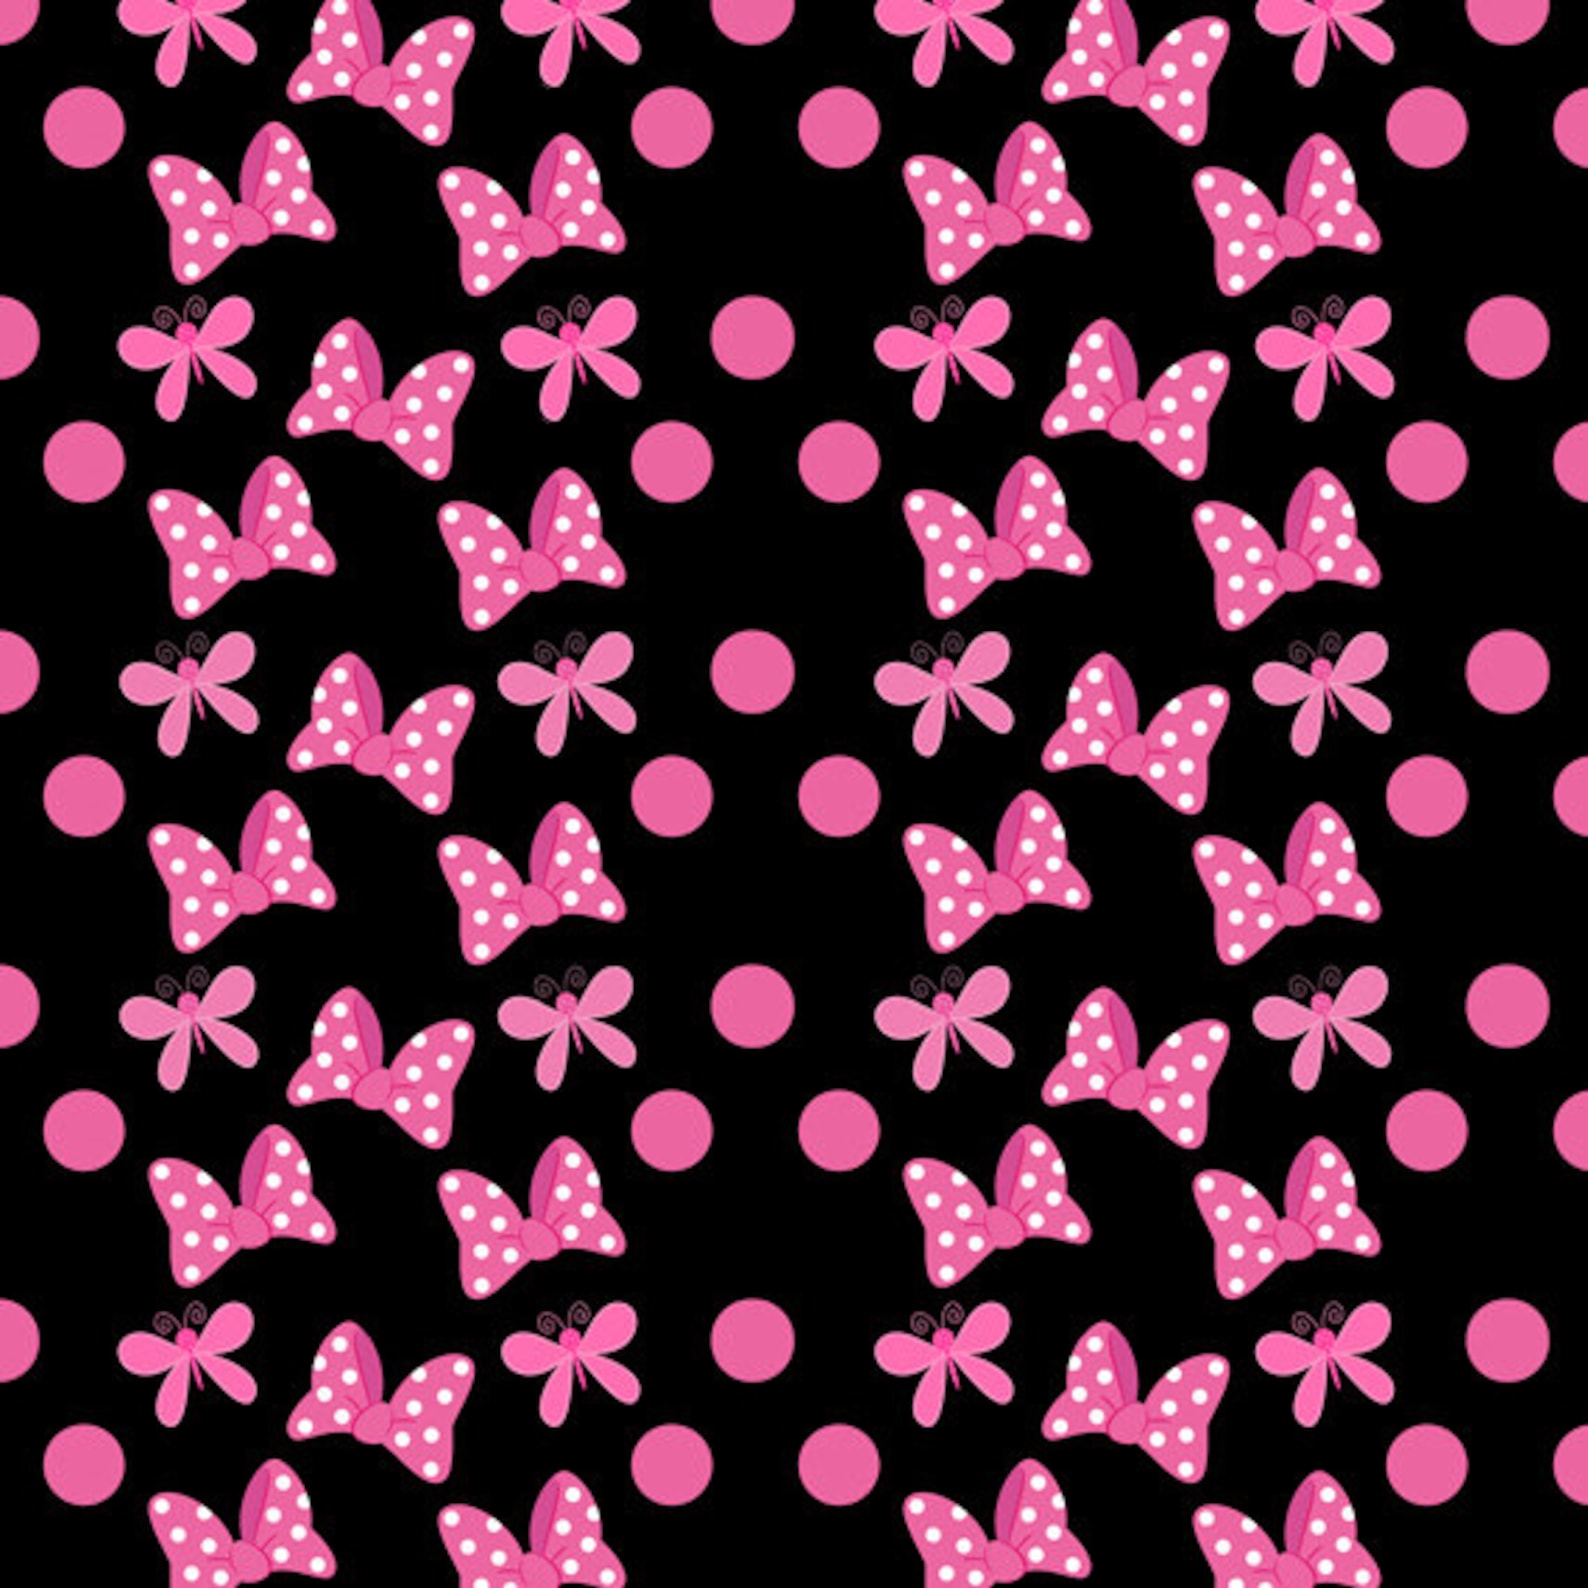 Minnie Mouse Digital Paper Pack Polka Dots Minnie Mouse Etsy